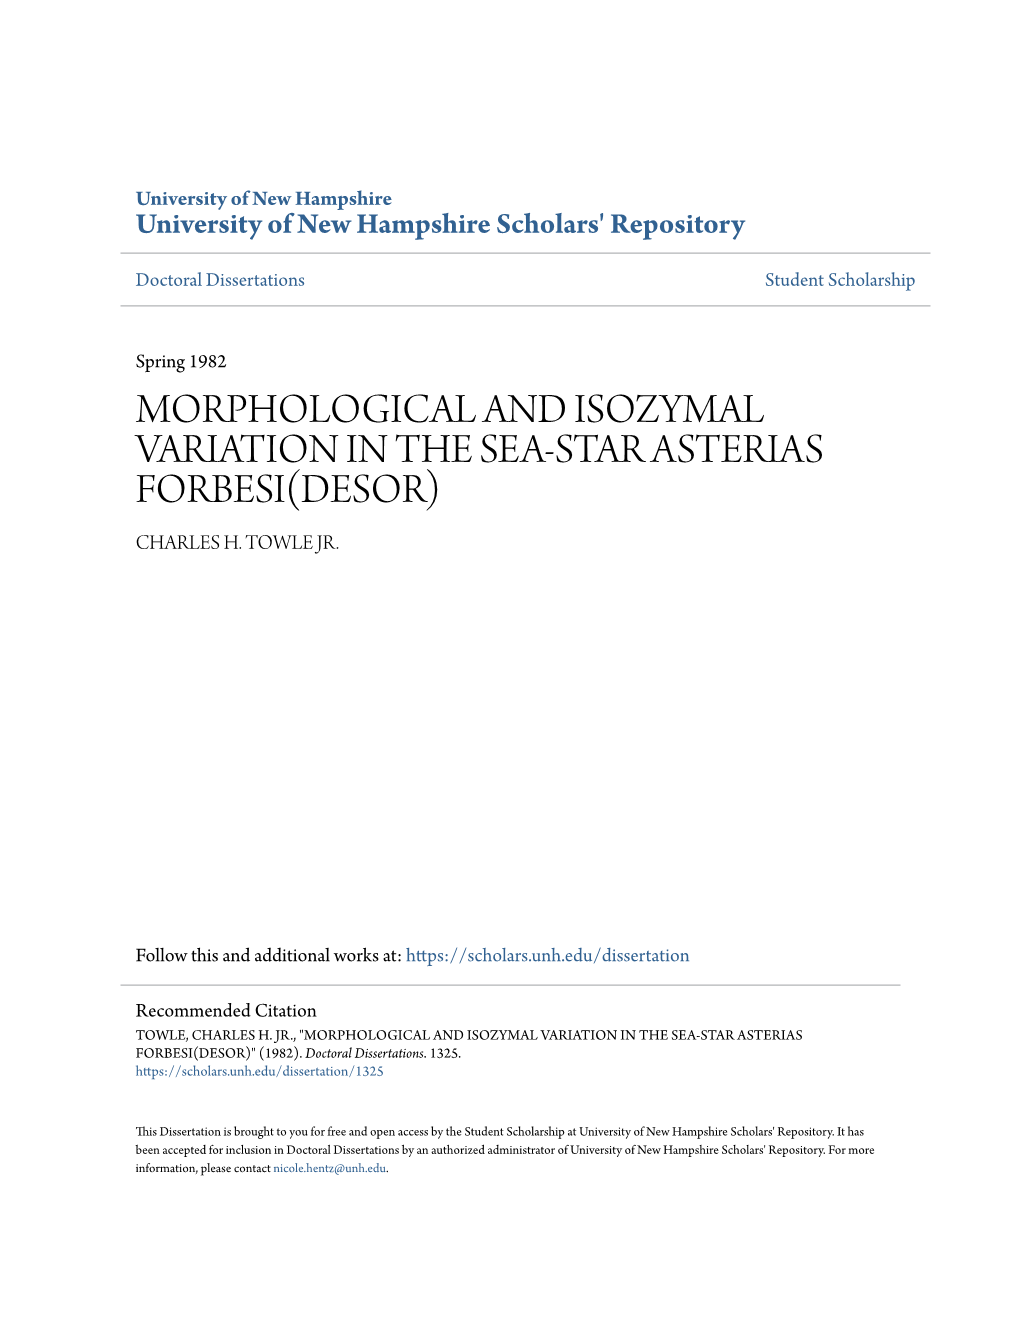 Morphological and Isozymal Variation in the Sea-Star Asterias Forbesi(Desor) Charles H